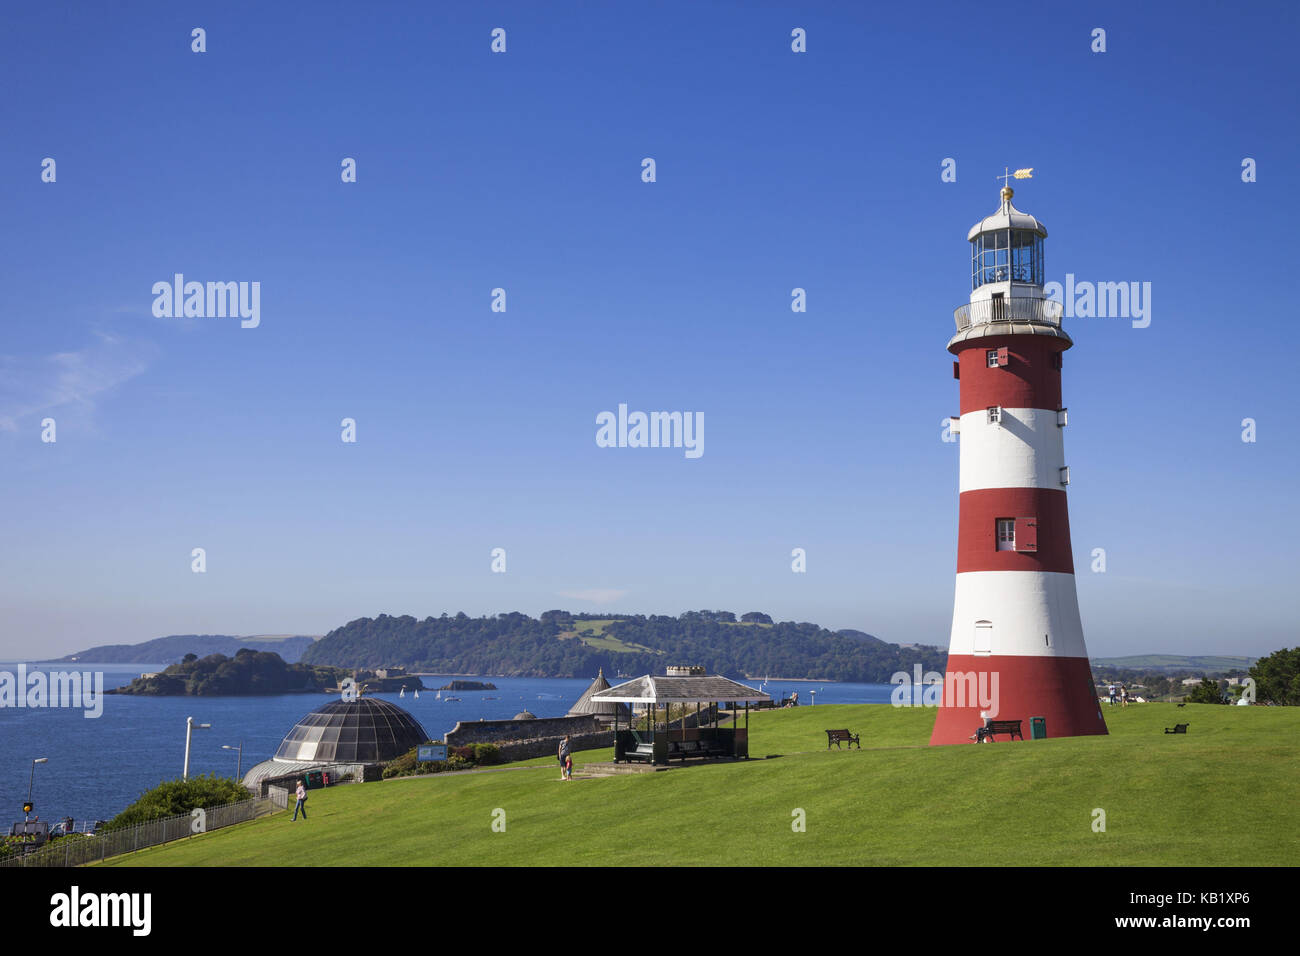 Angleterre, Devon, Plymouth, Plymouth Hoe, phare, appelé Smeaton's Tower ou Eddystone Lighthouse, Banque D'Images